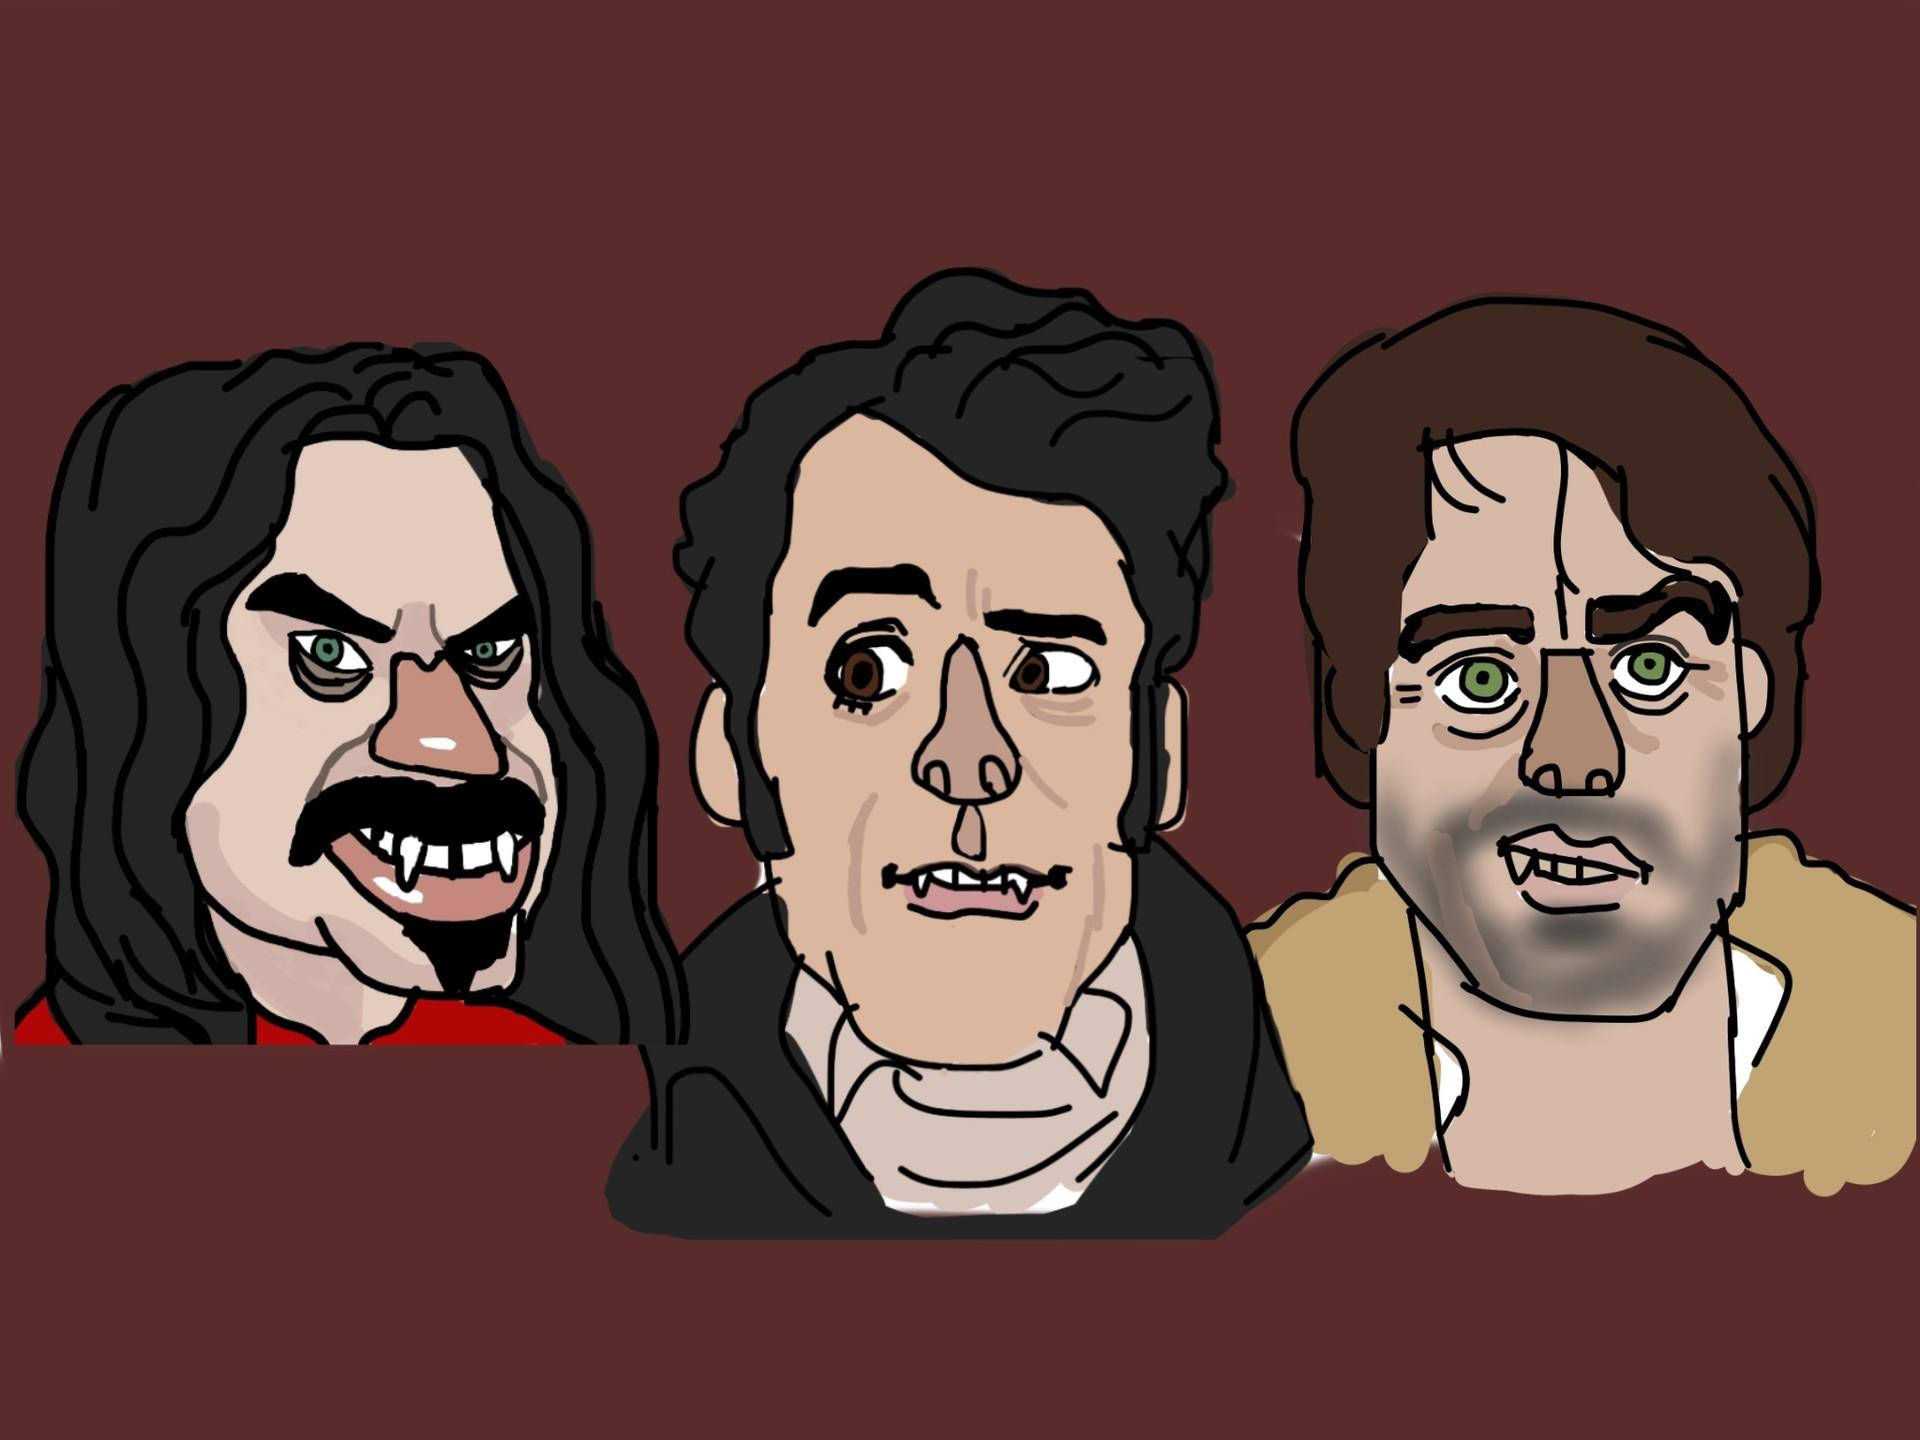 What We Do In The Shadows Digital Art Wallpaper